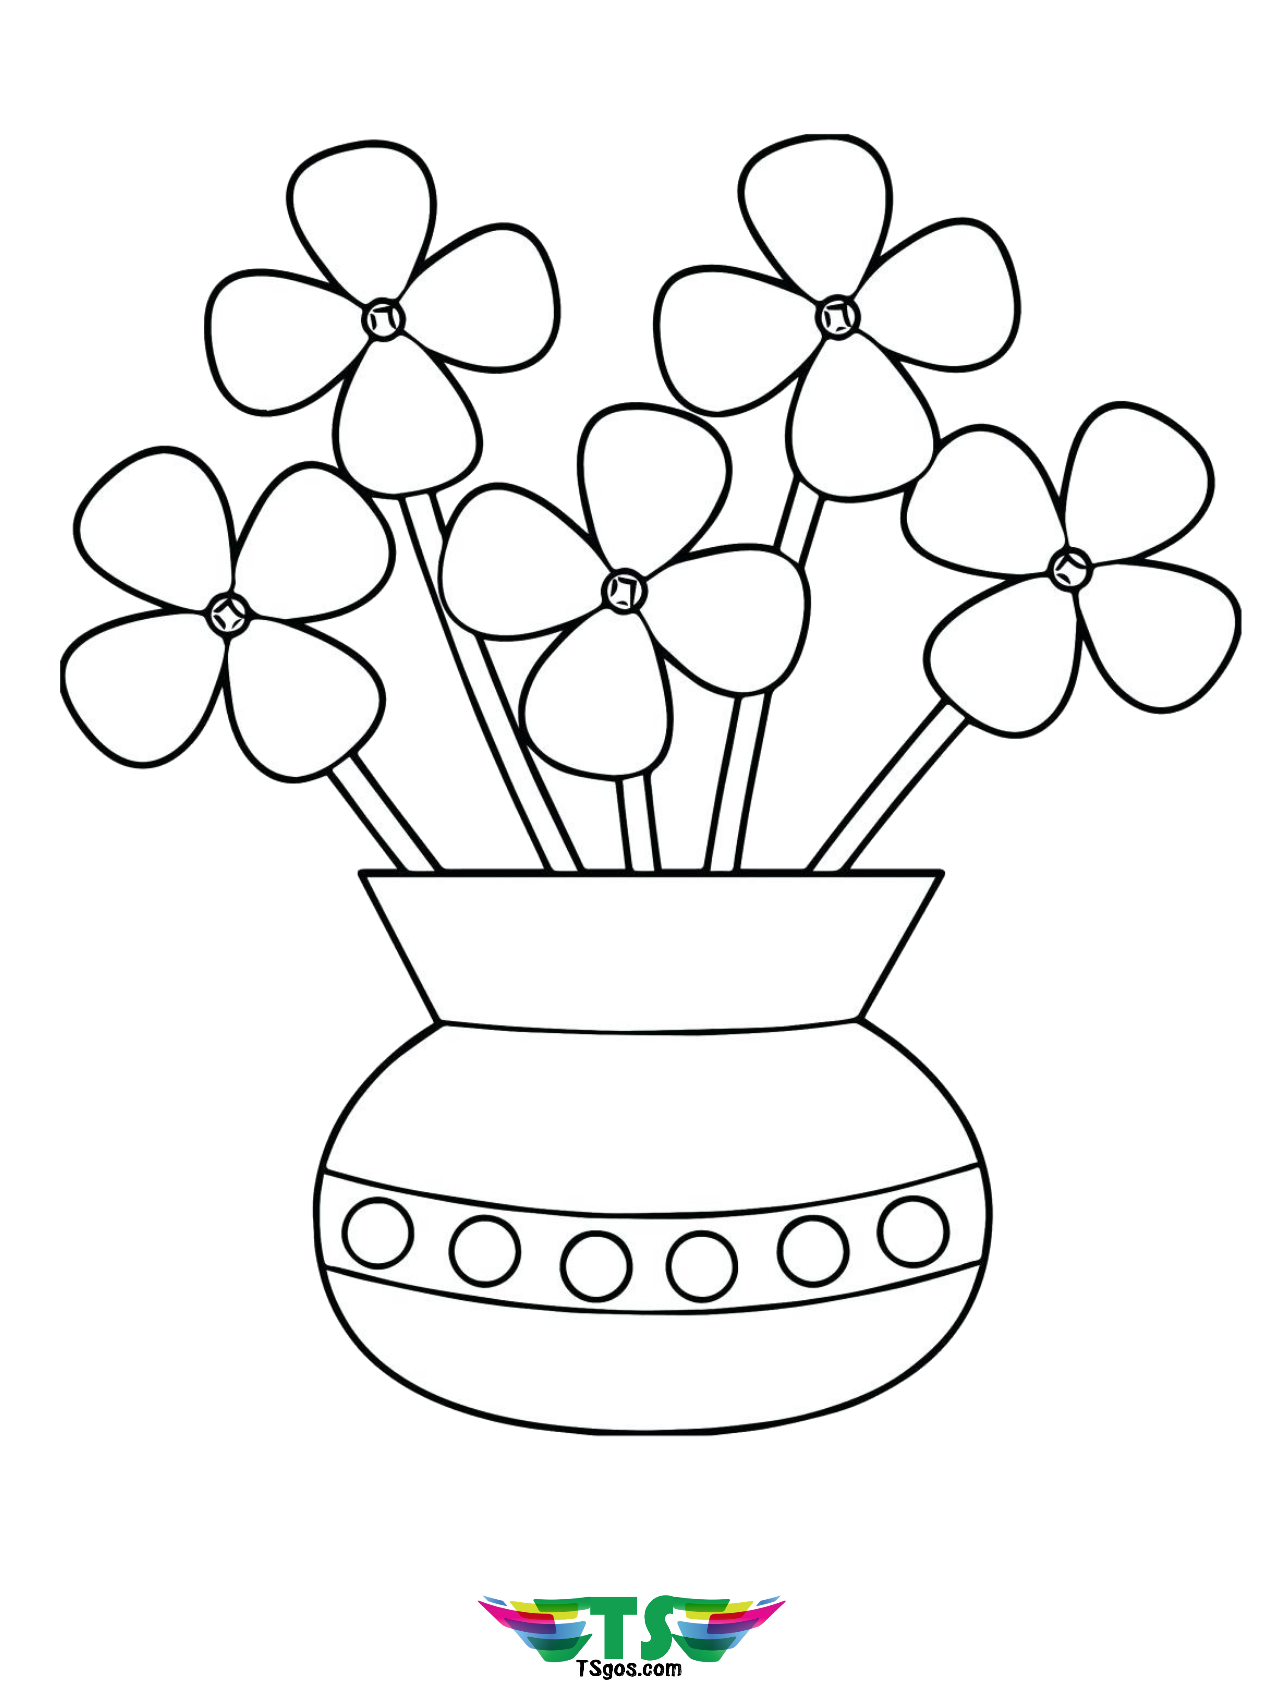 Printable Flowers In A Vase Coloring Page TSgos